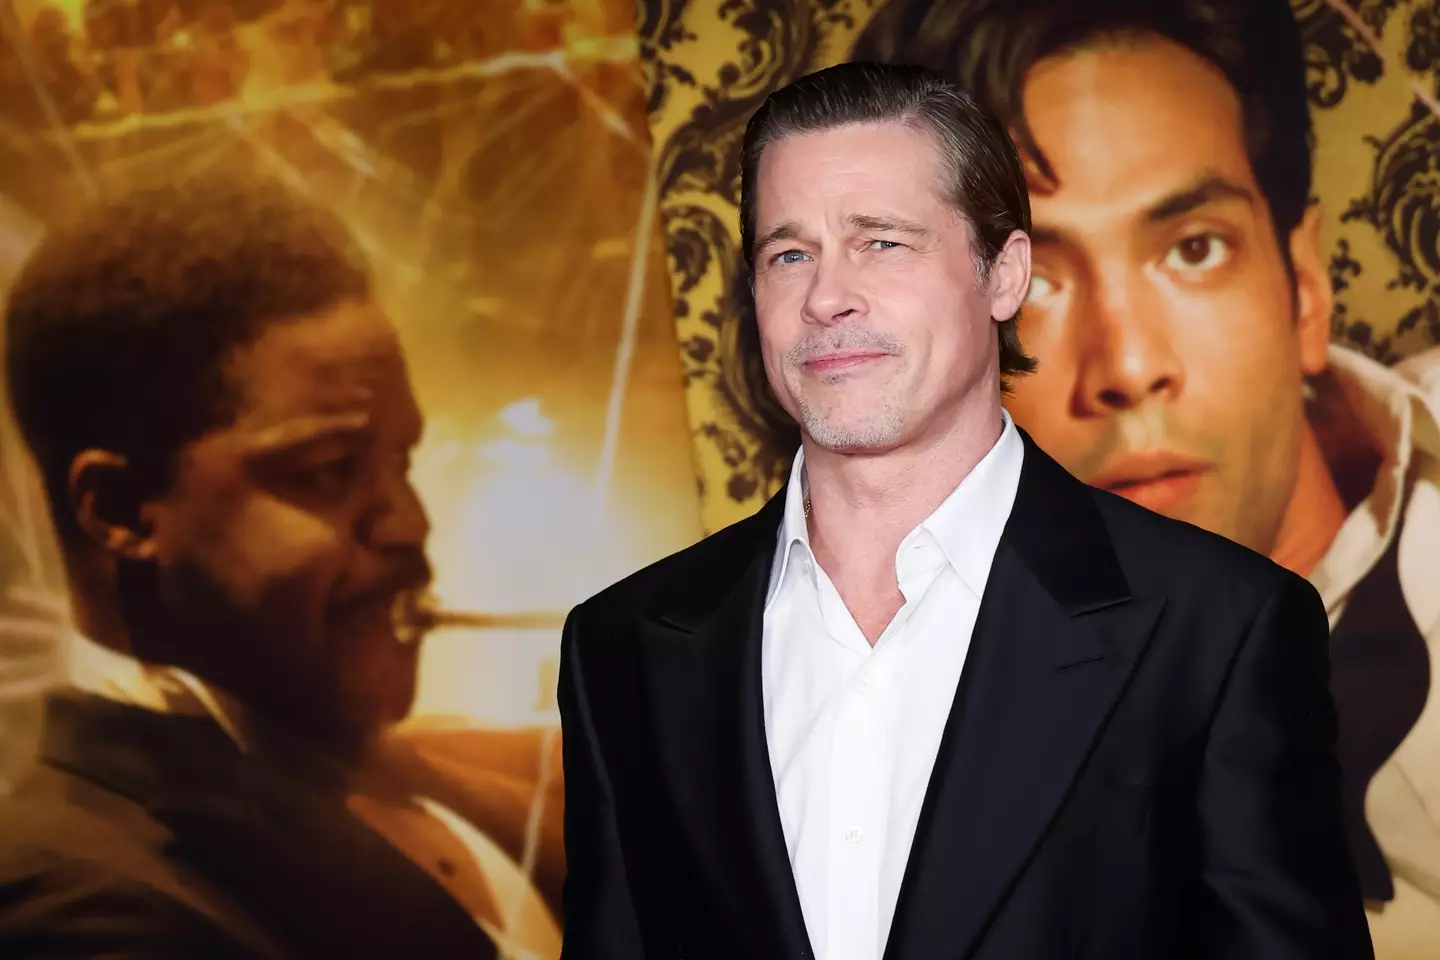 Brad Pitt lived in the home with Angelina Jolie.